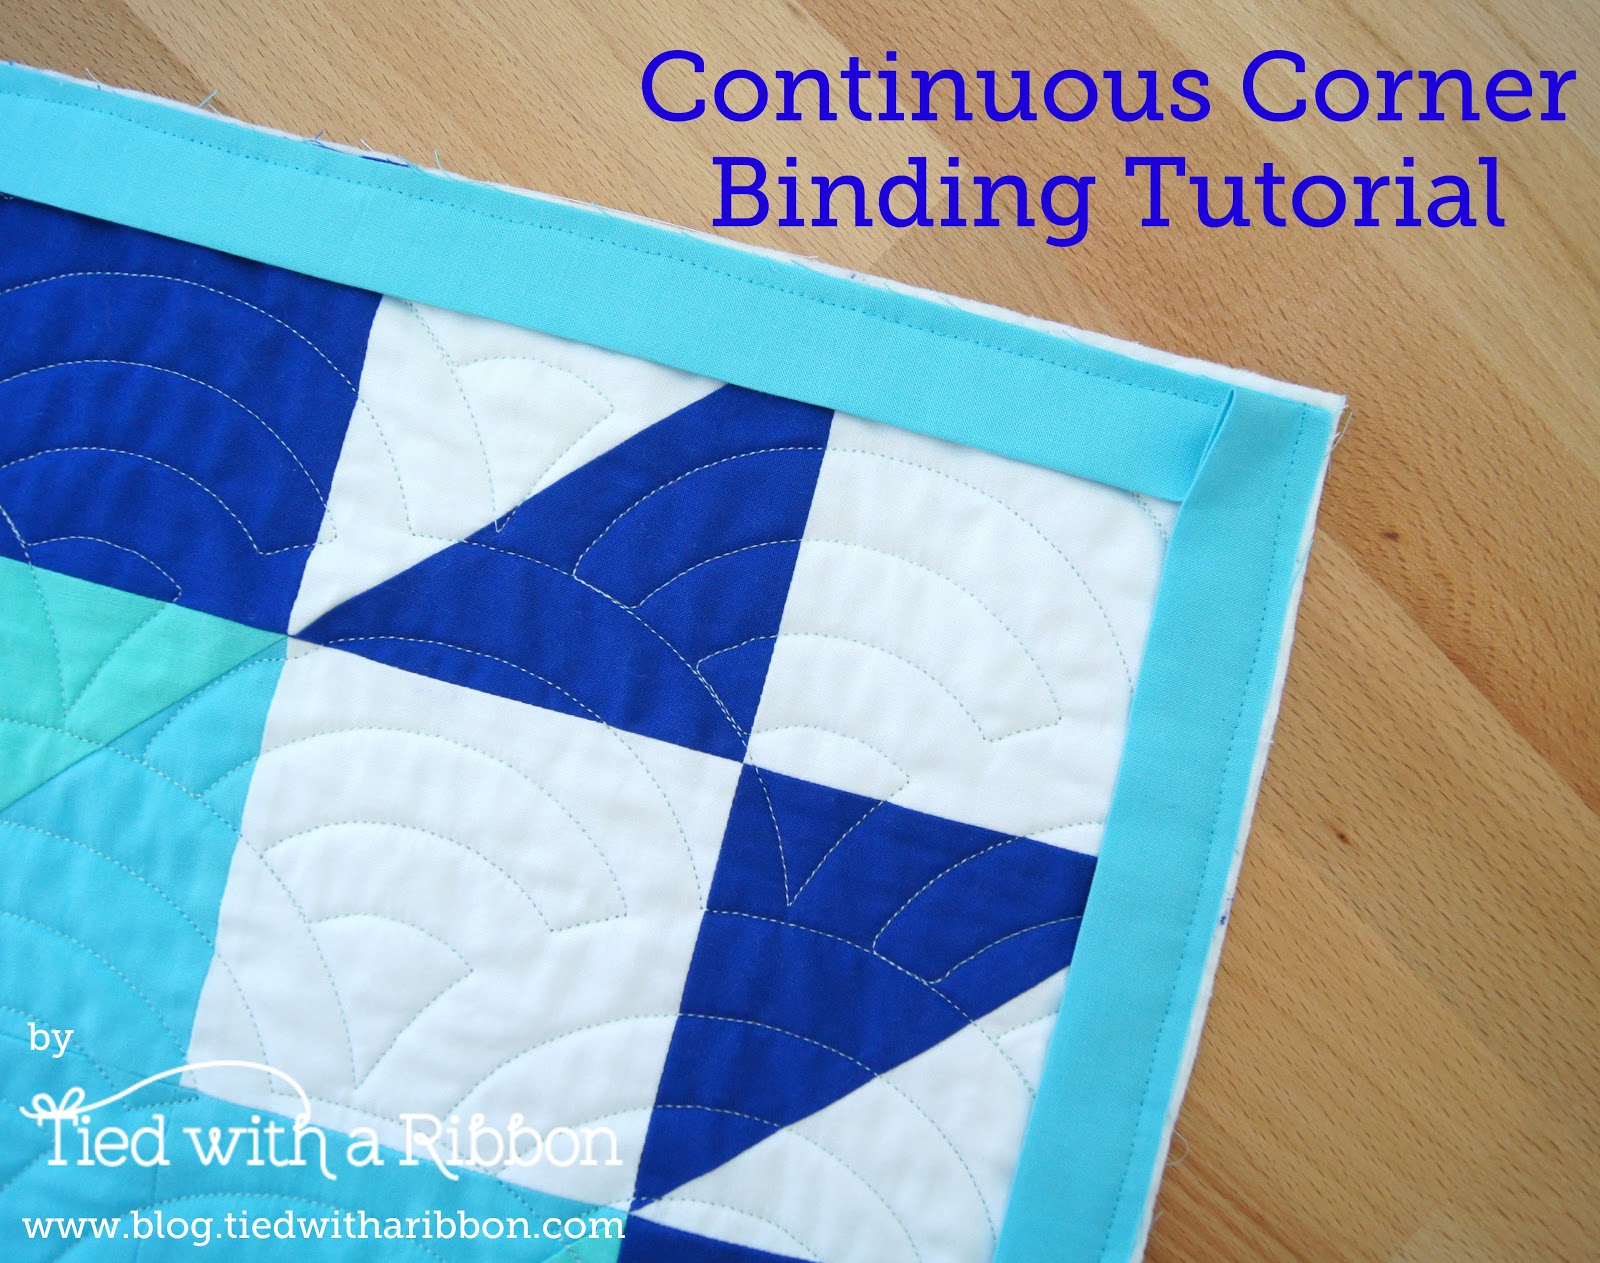 Tips And Tricks For Working With Quilt Binding